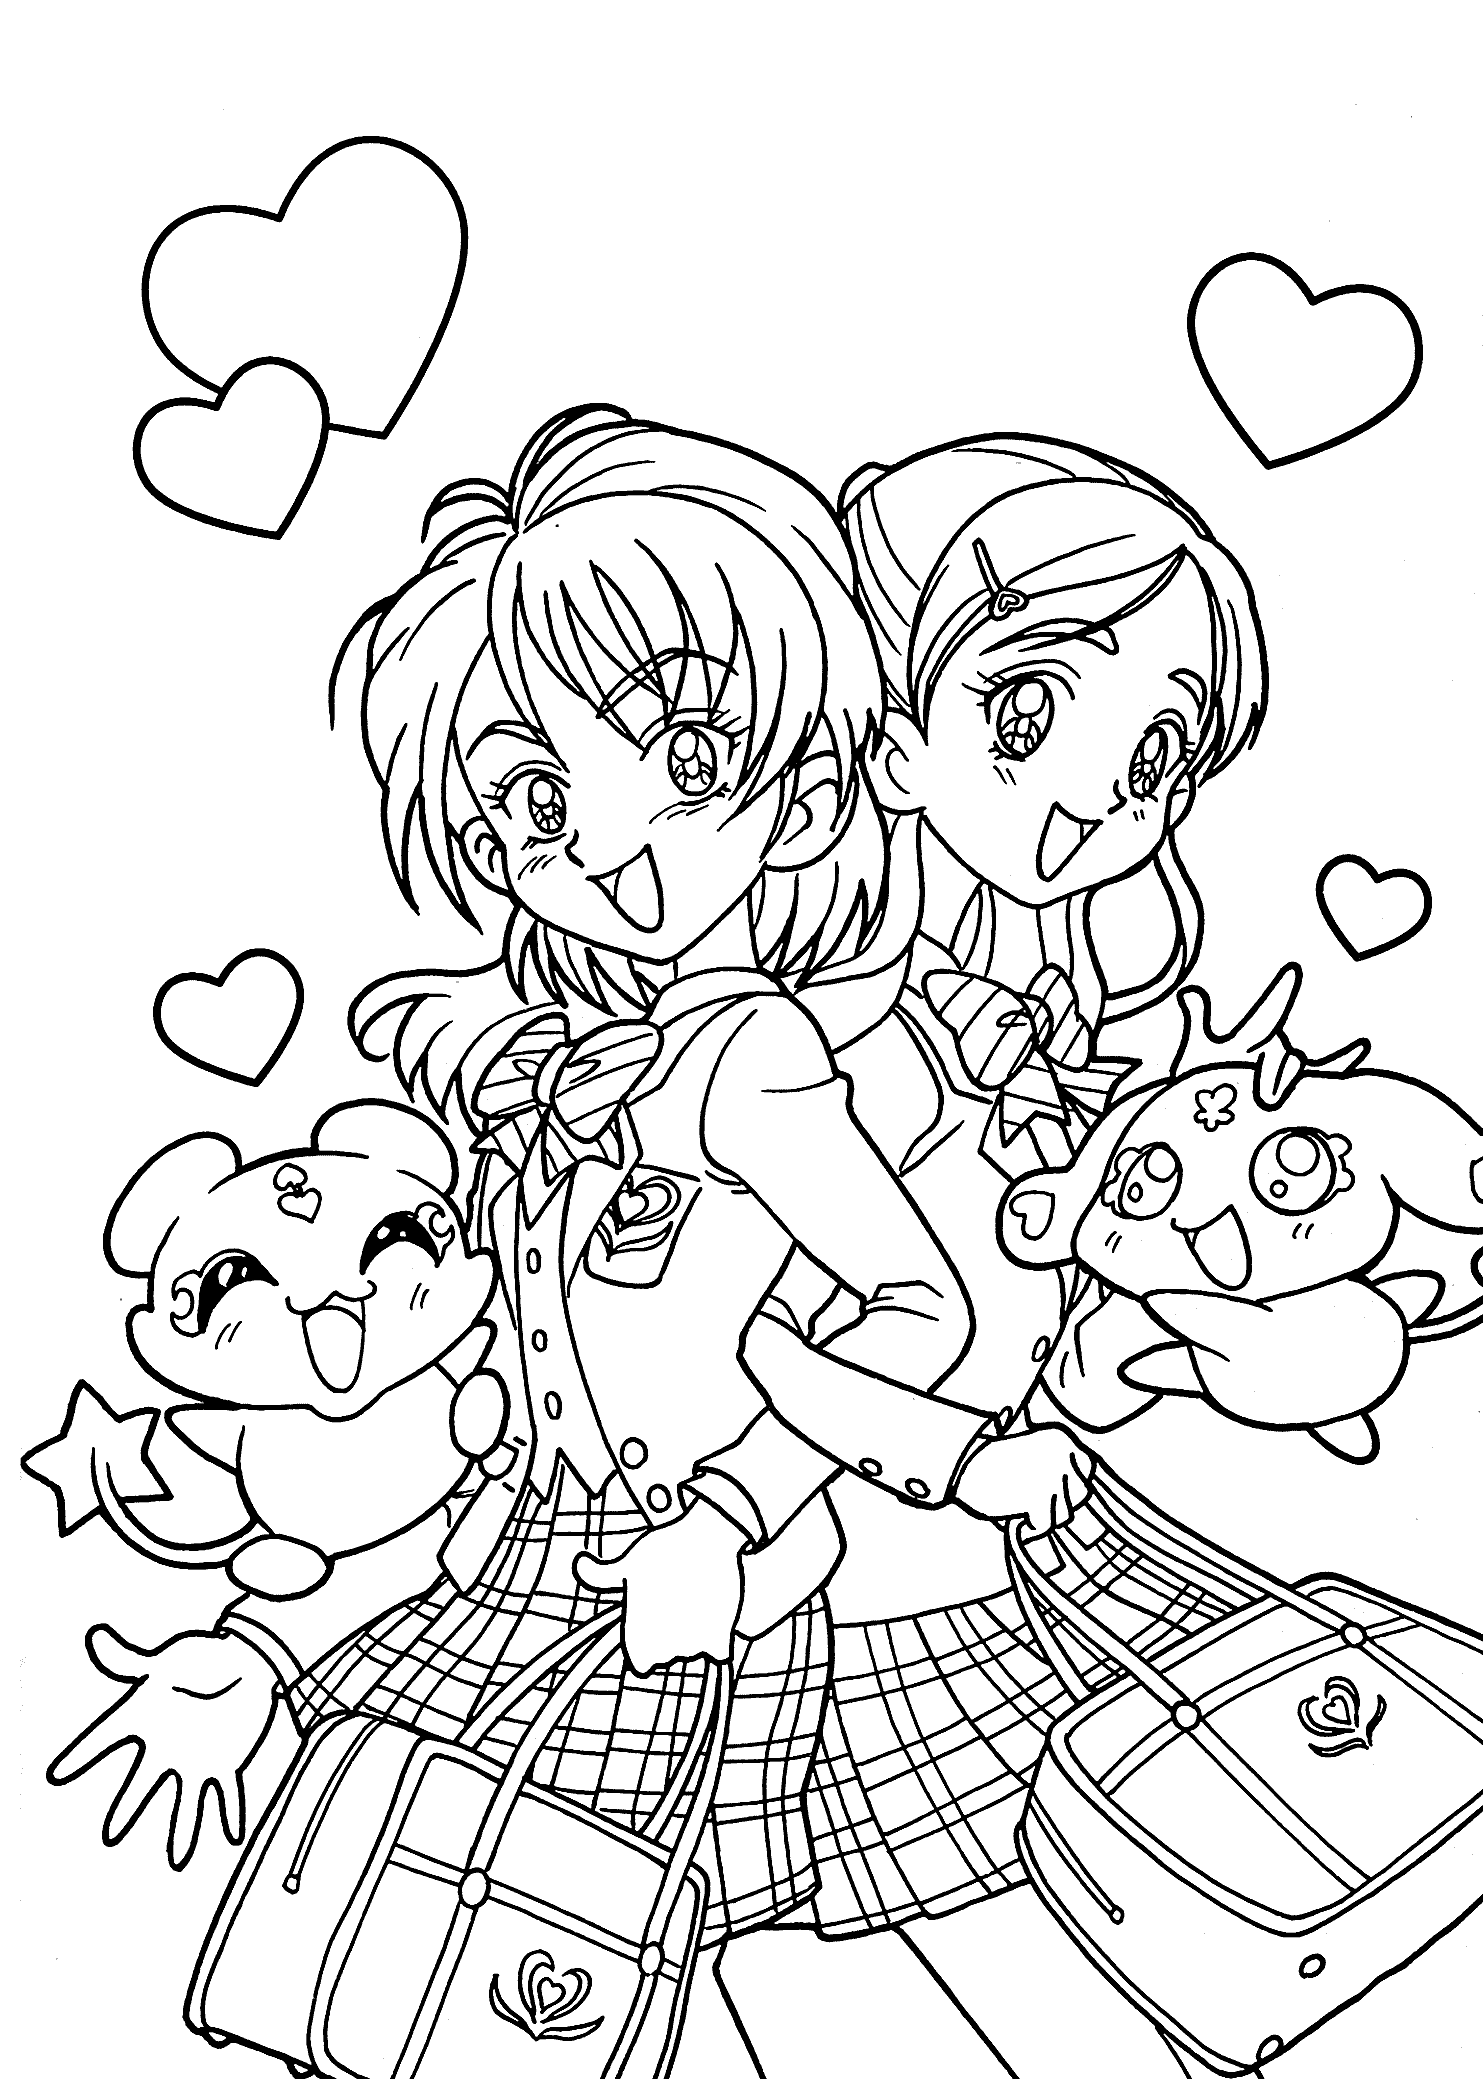 Anime Coloring Pages For Girls